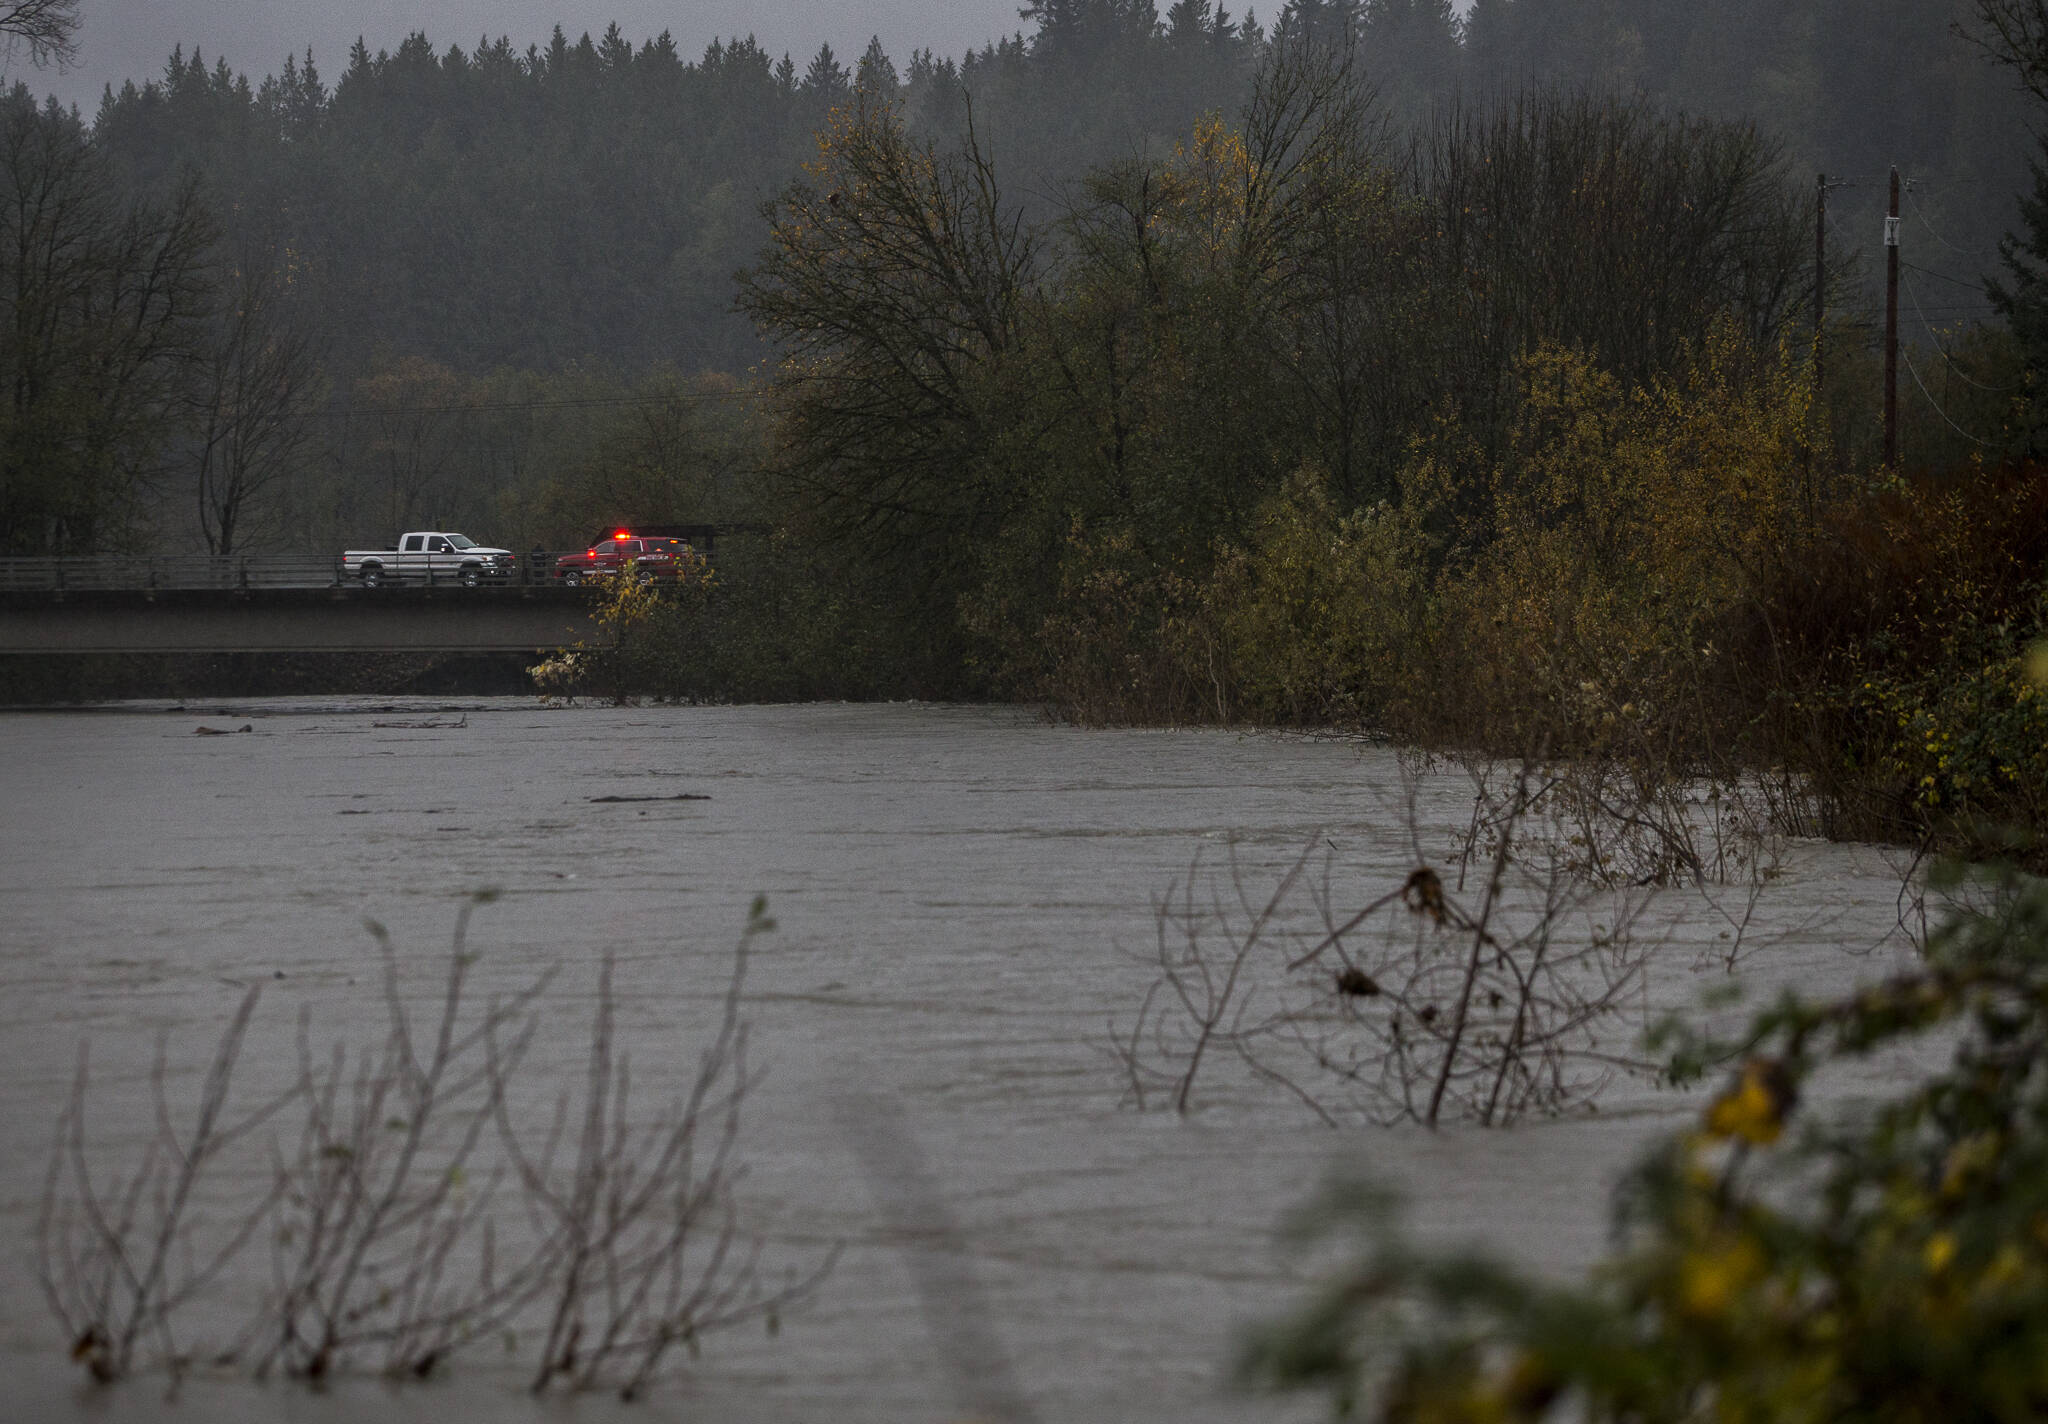 People step out of their vehicles along the Pioneer Highway to look at the rising water in Cook Slough on Friday in Silvana. (Olivia Vanni / The Herald)